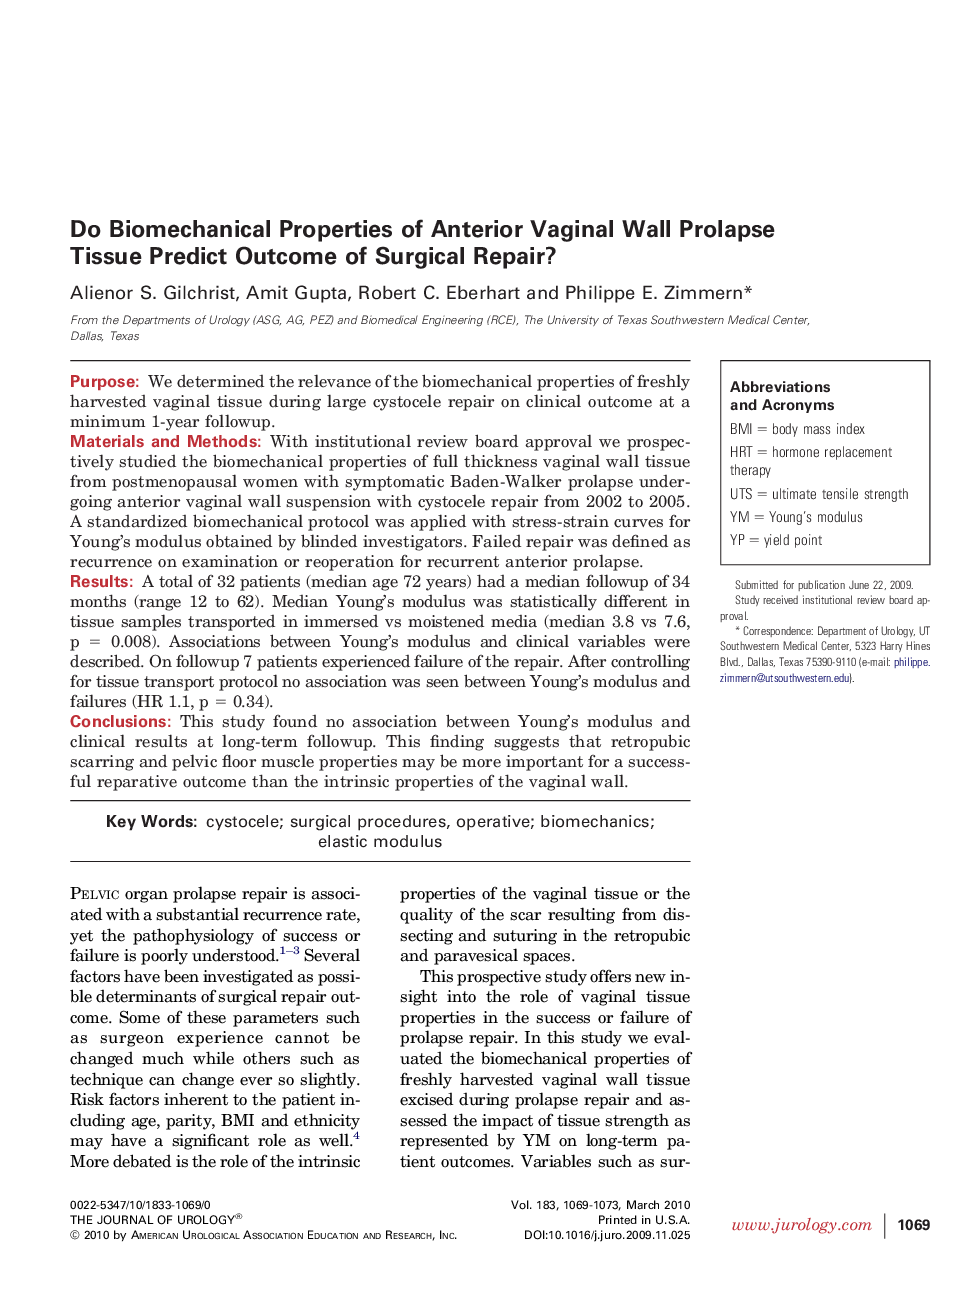 Do Biomechanical Properties of Anterior Vaginal Wall Prolapse Tissue Predict Outcome of Surgical Repair? 